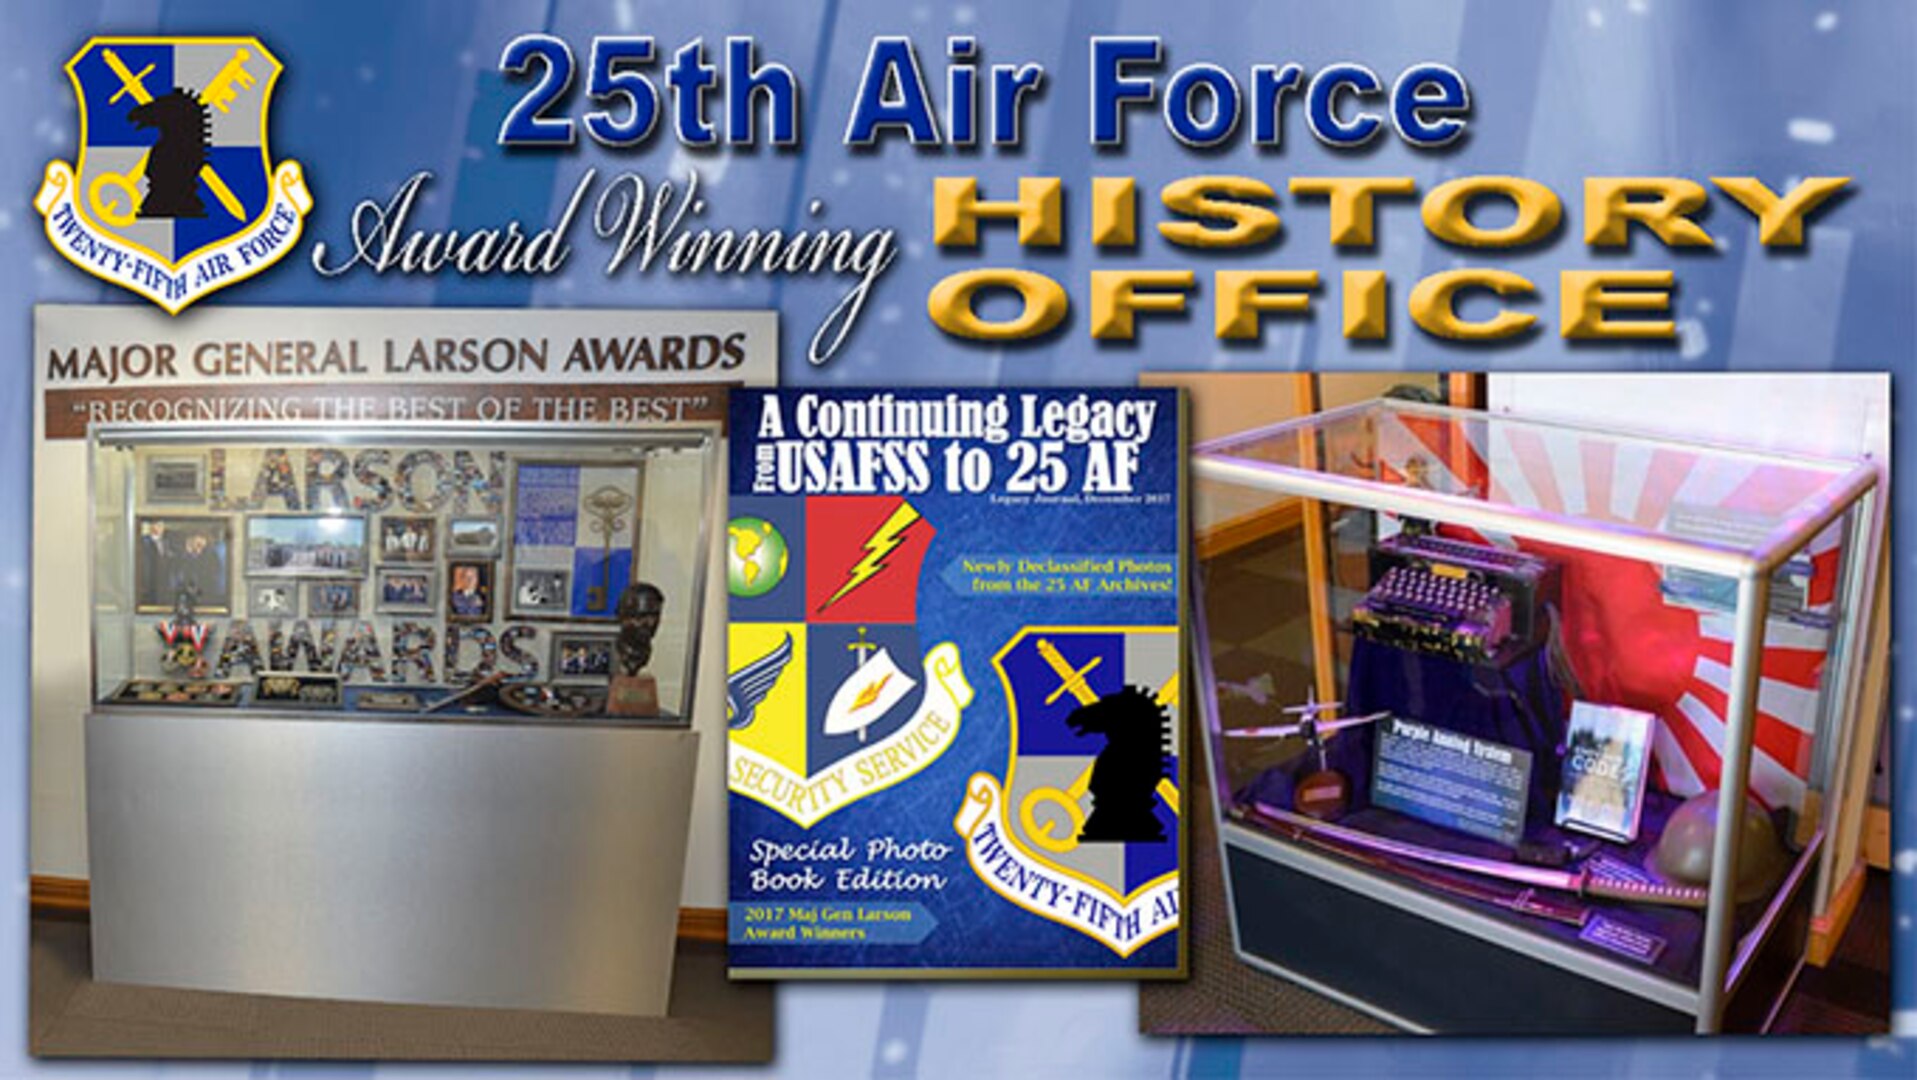 The 25th Air Force History Office was  recognized for preserving ISR’s past.